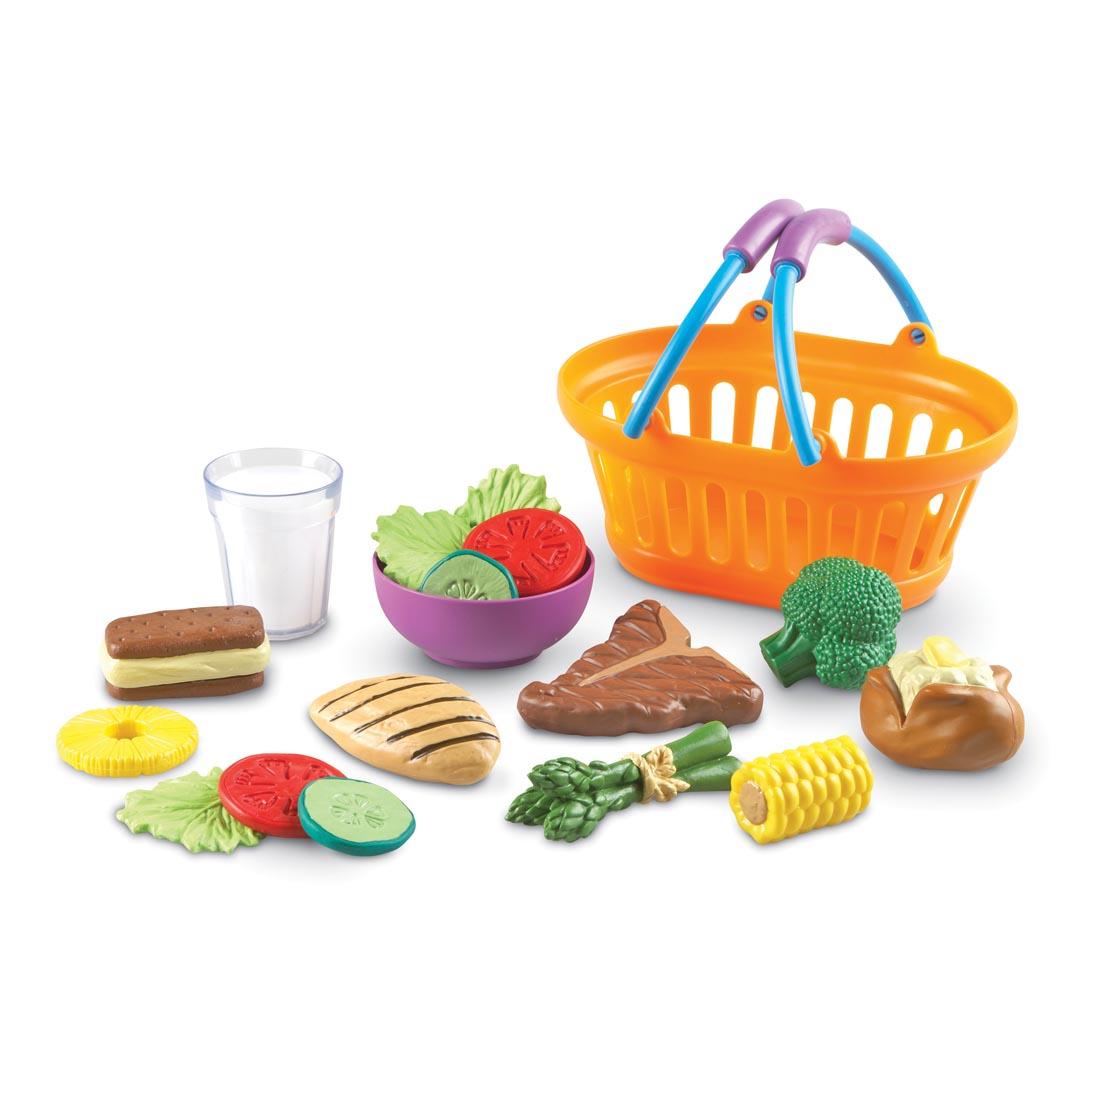 plastic basket next to play food including bowl of salad, grilled chicken breast, baked potato with butter and more